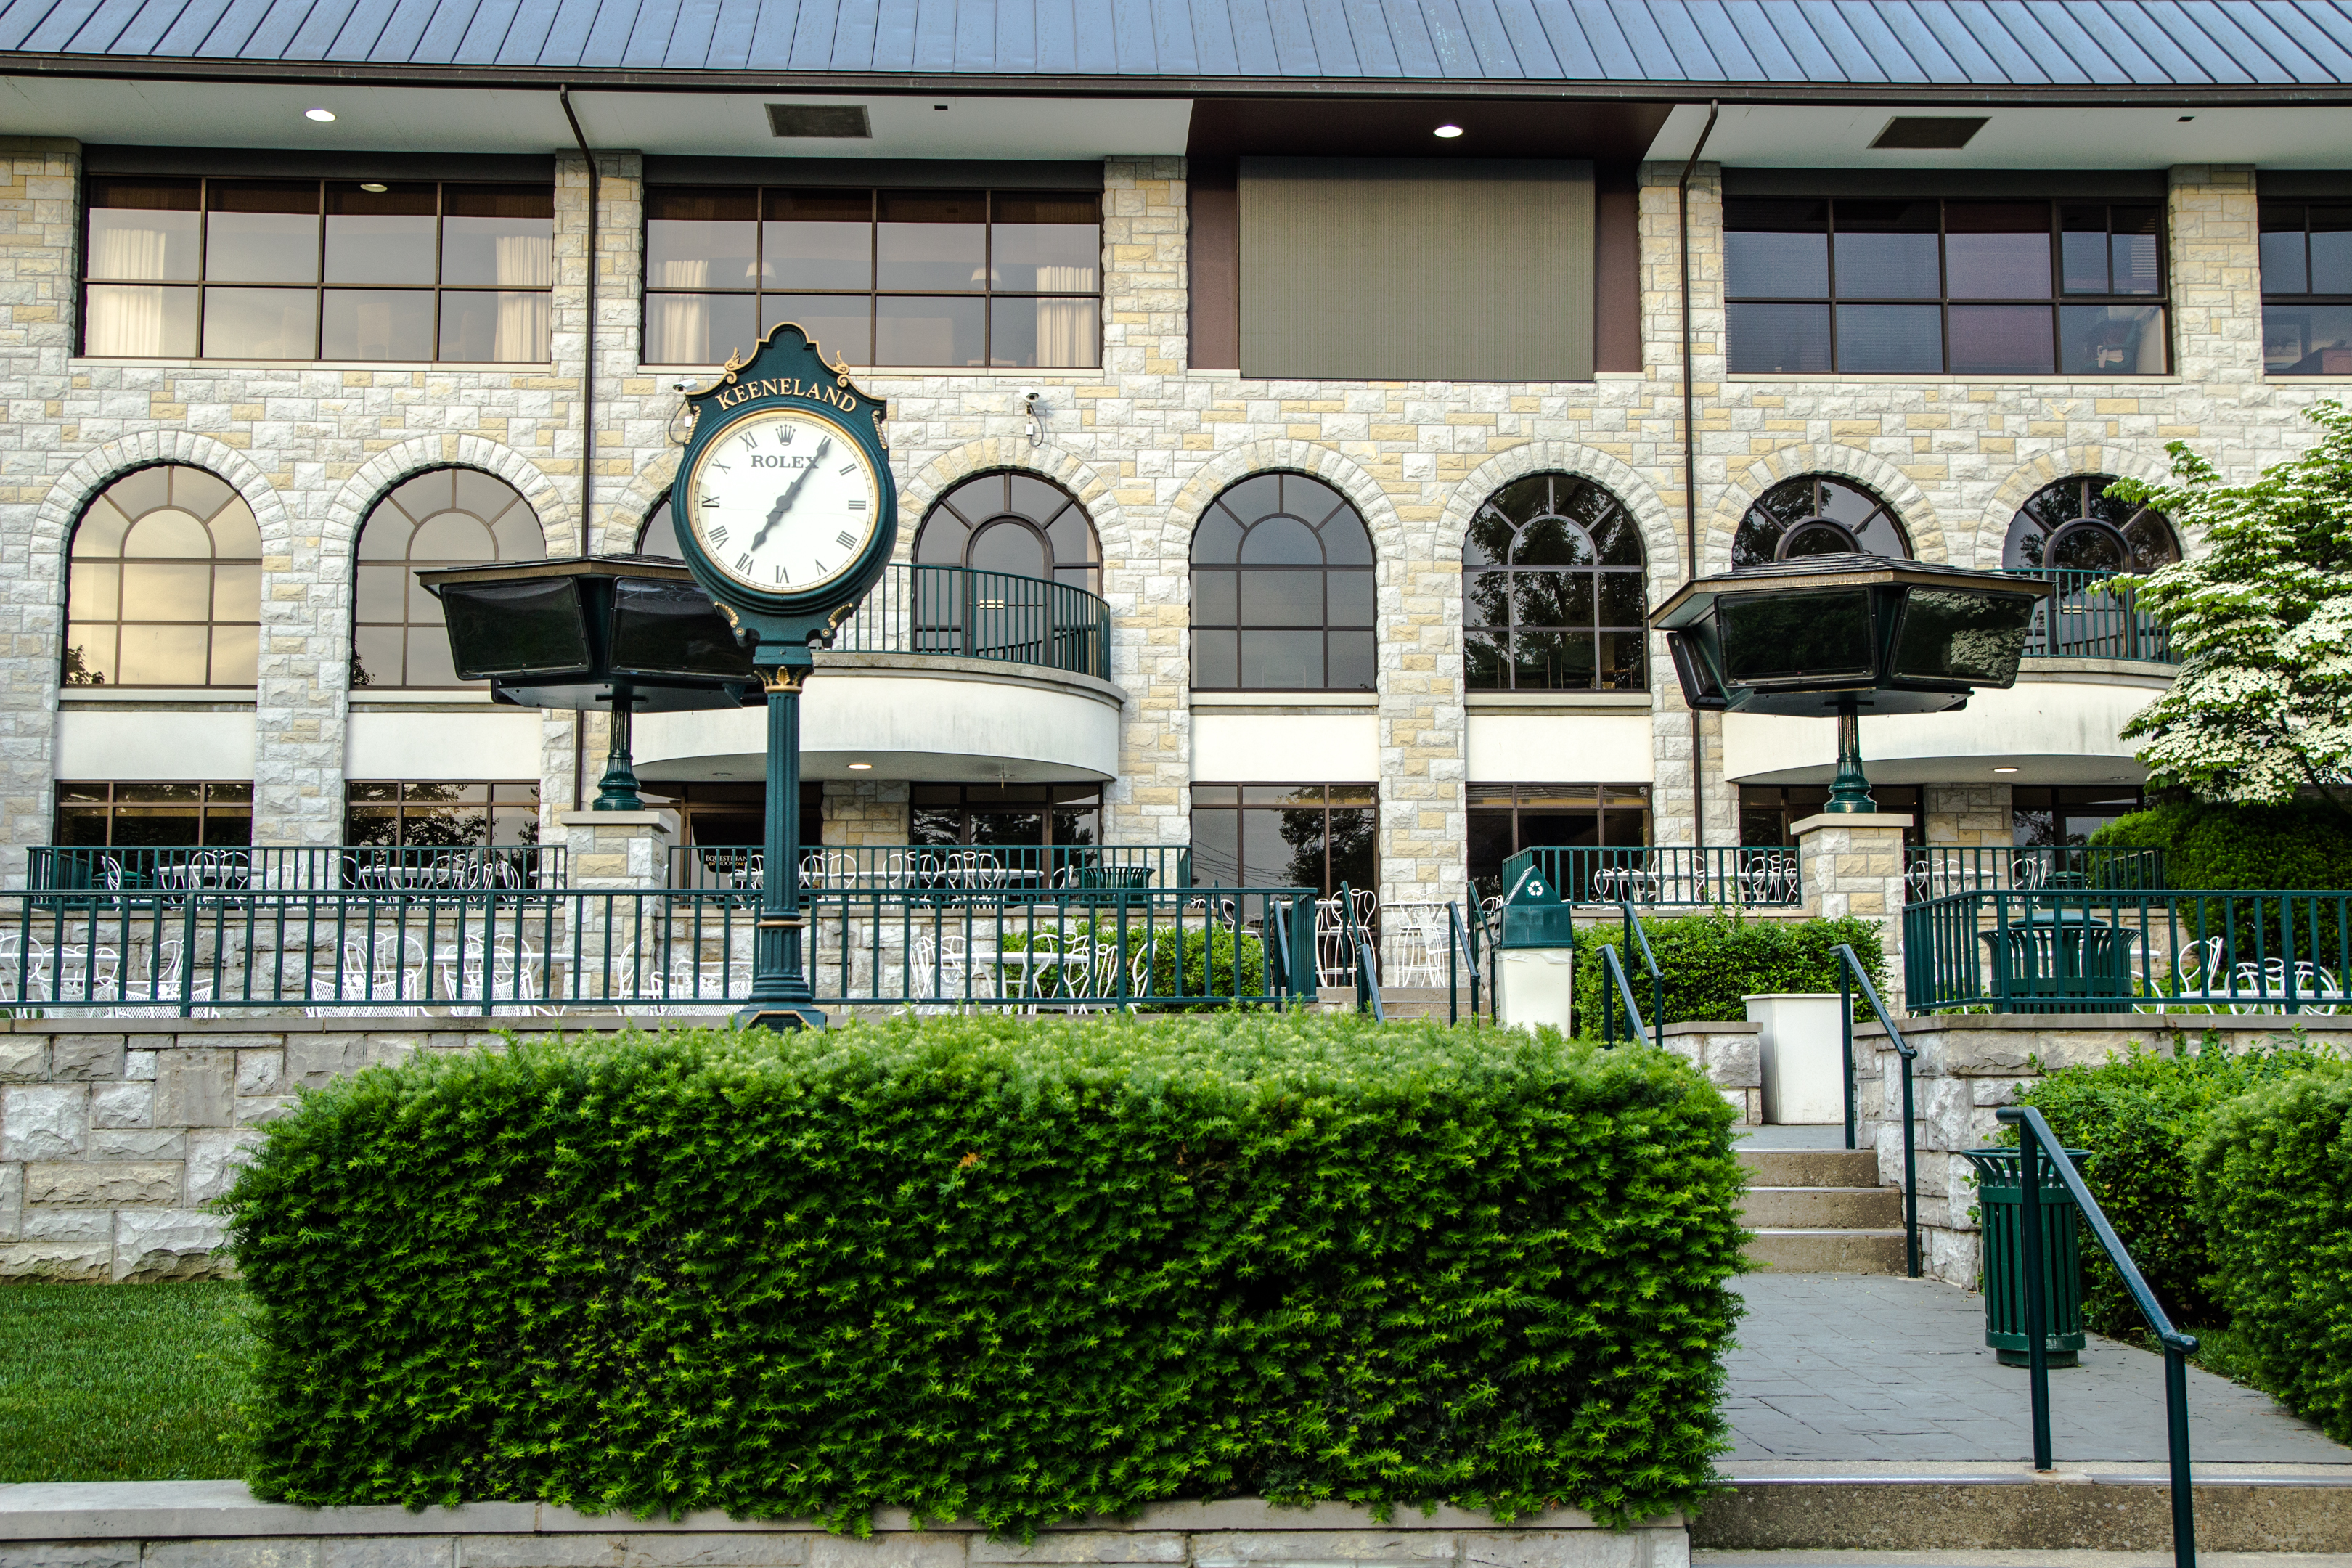 Family Vacation at Lexington - Catch the Action at the Keeneland Racetrack - Keeneland Racetrack